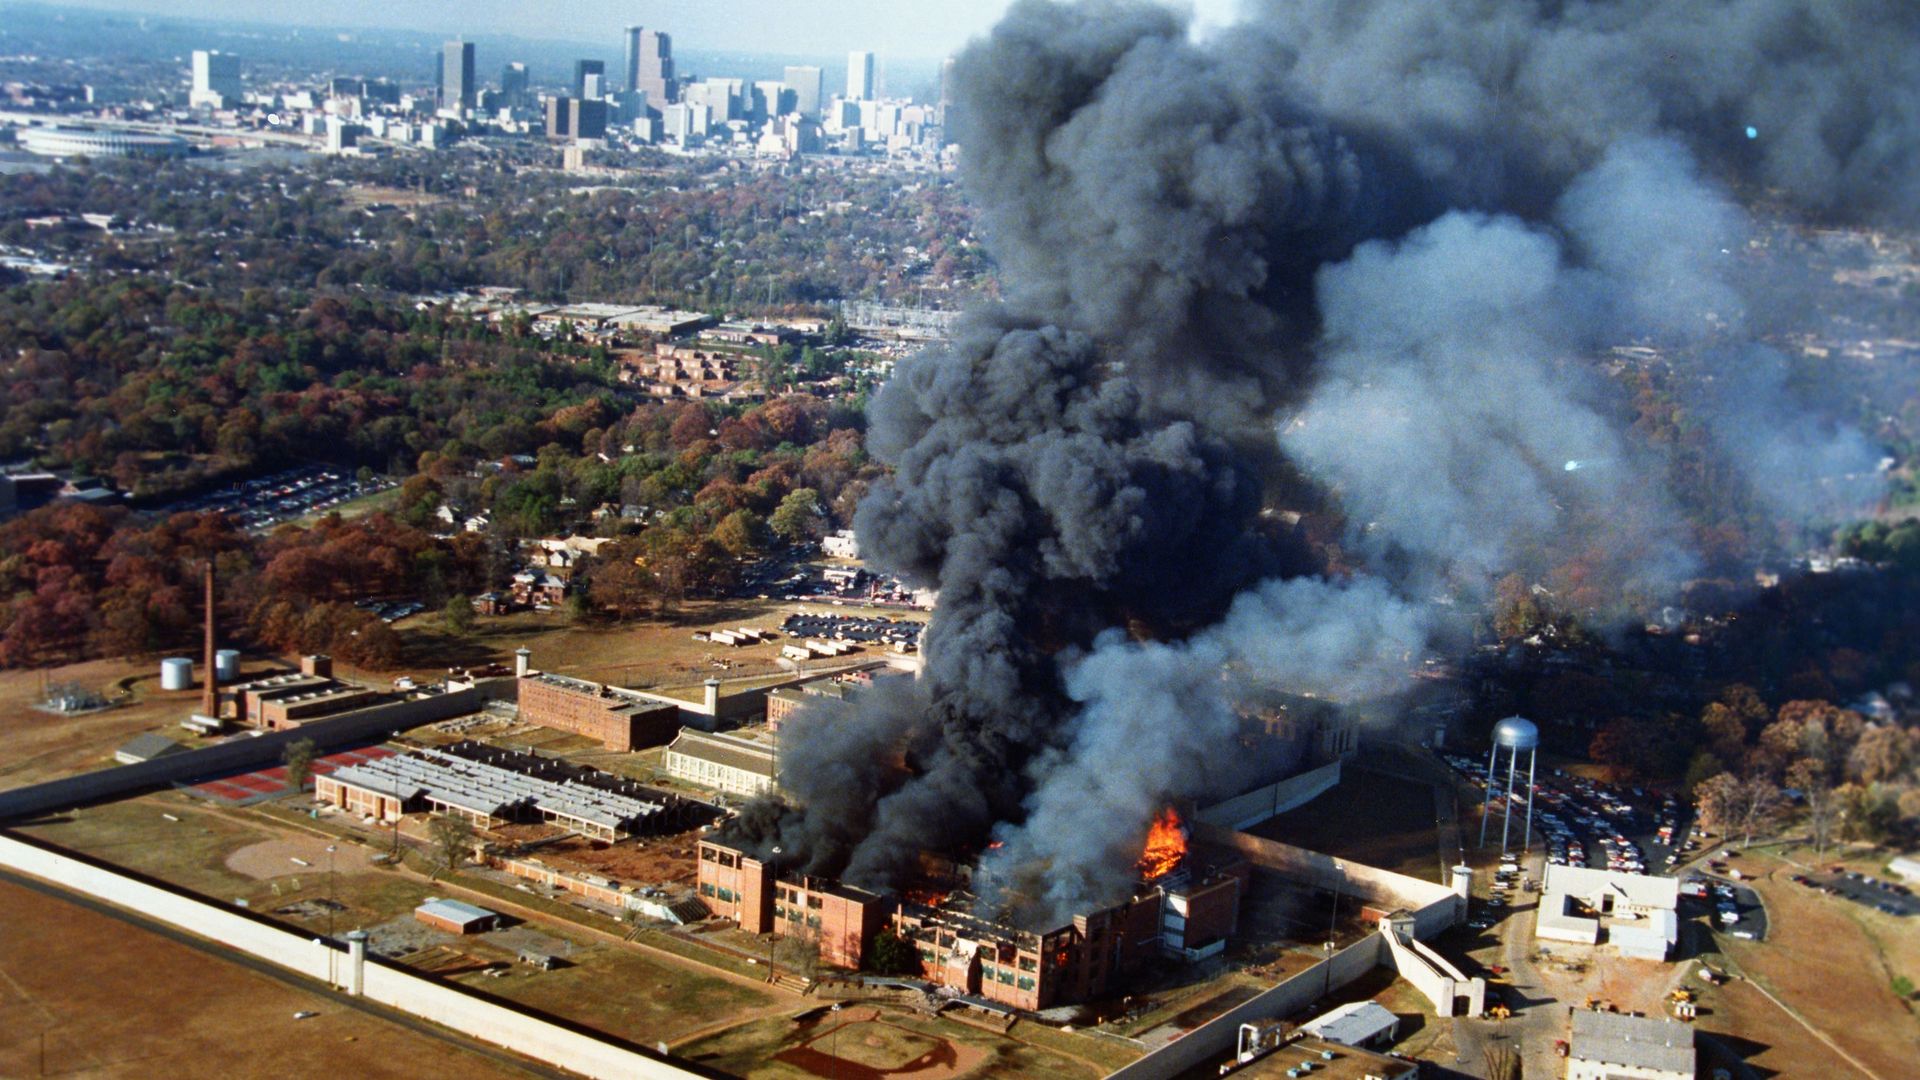 A brick building on a penitentiary campus billows dark smoke from a fire with the city skyline in the background